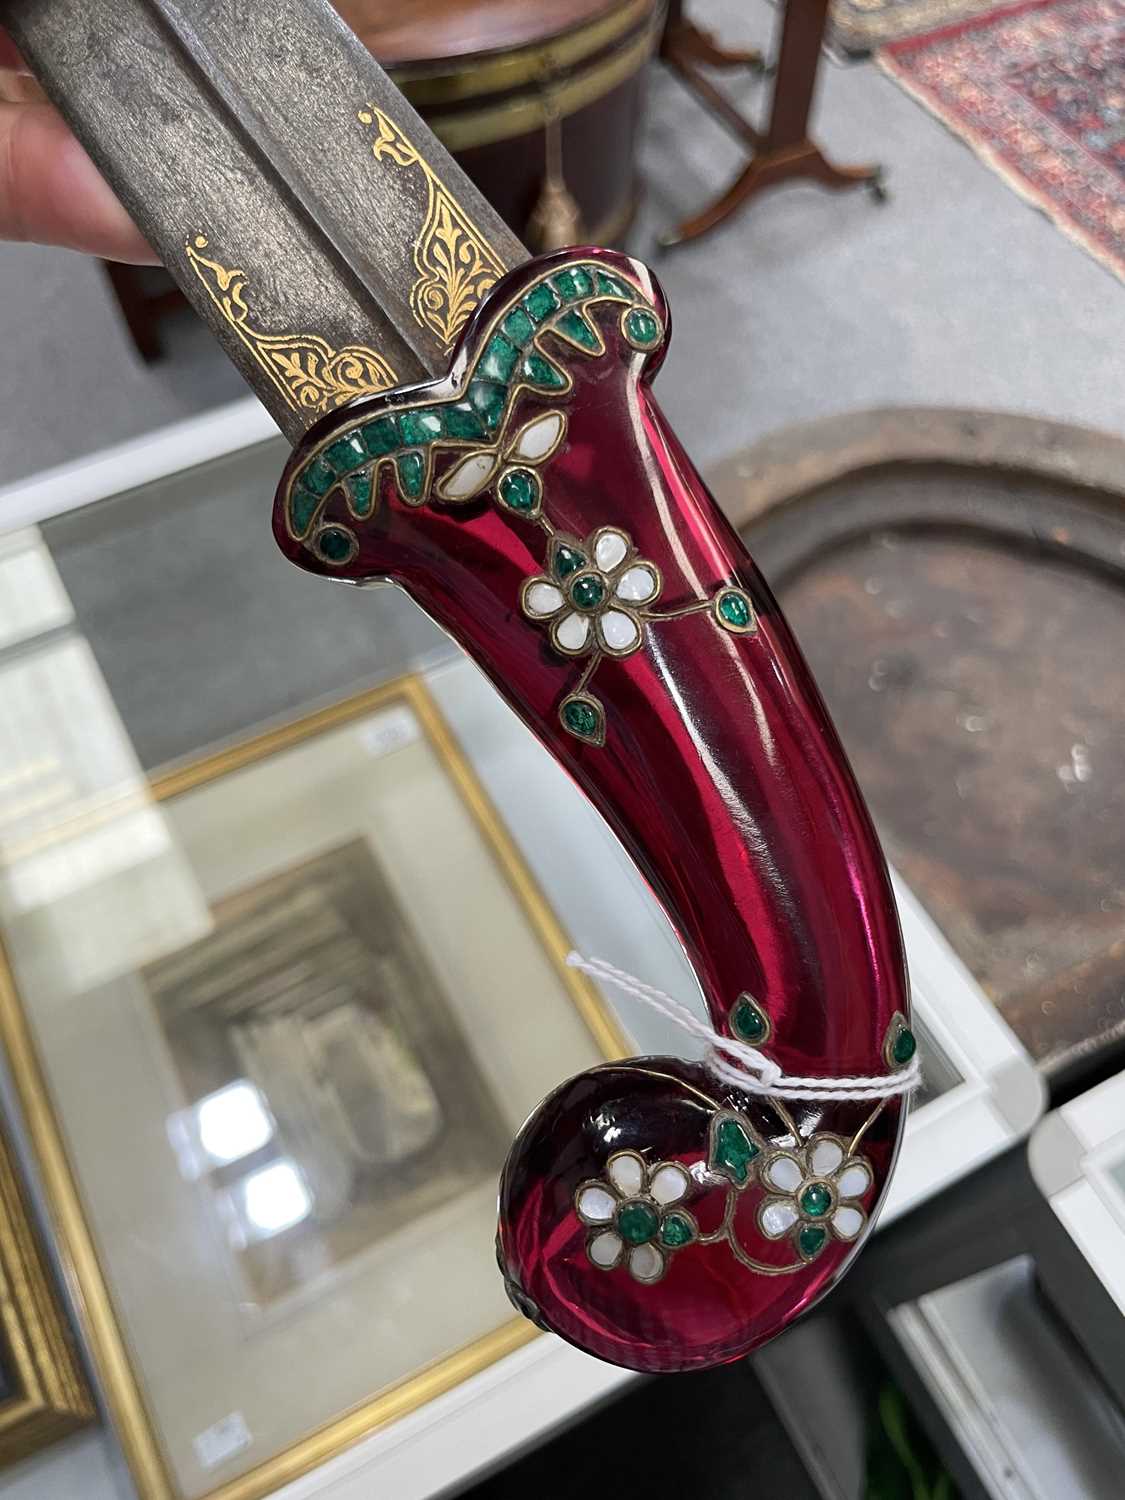 AN INLAID RED CRYSTAL-HILTED DAGGER, MUGHAL, INDIA, 18TH-19TH CENTURY - Image 15 of 15